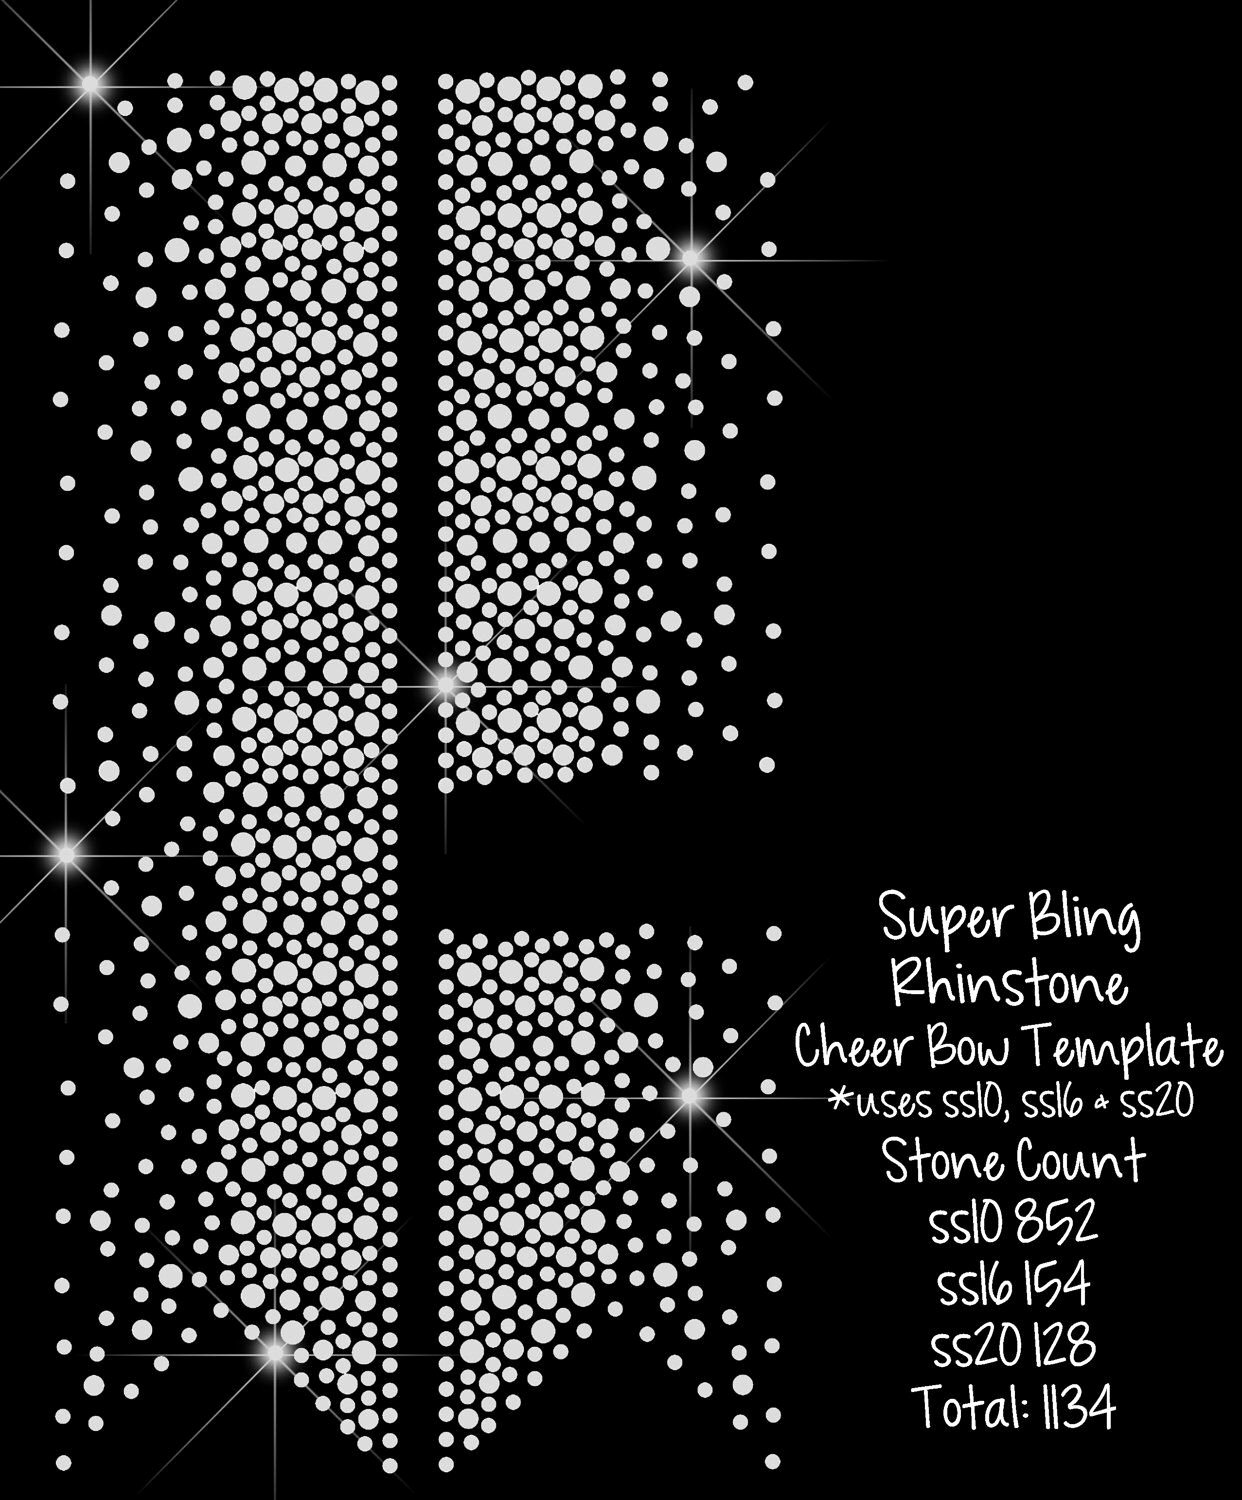 Cheer Bow Design Template Luxury Super Bling Rhinestone Cheer Bow Strip Template by